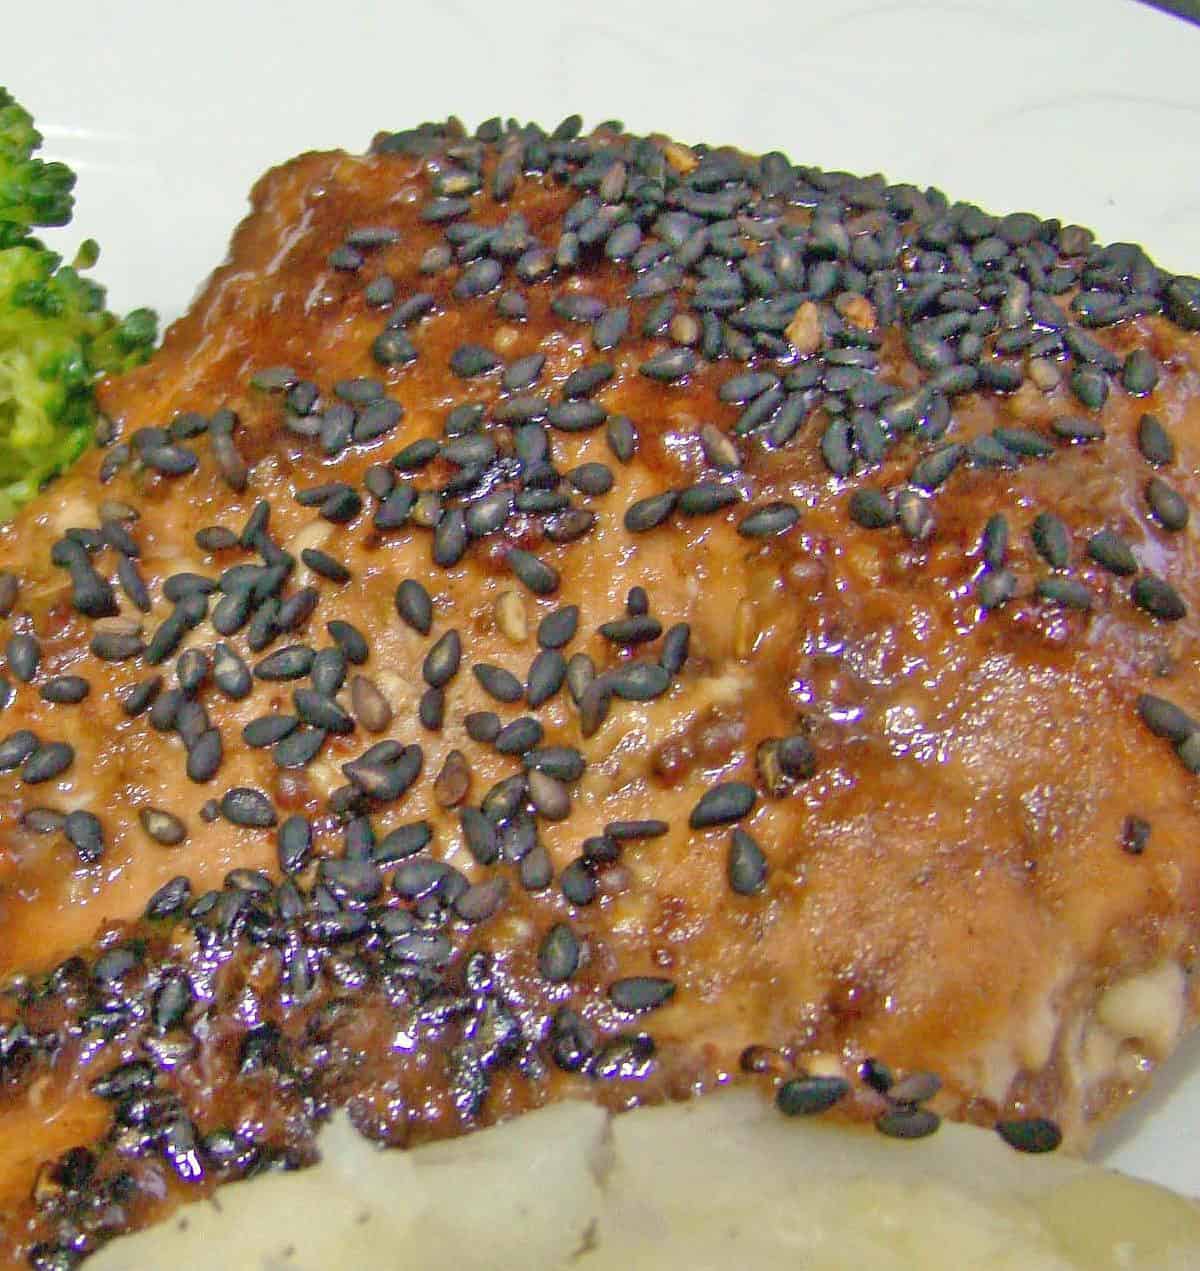  Our balsamic glaze strikes the perfect balance of tangy and sweet, elevating the flavors of the salmon.